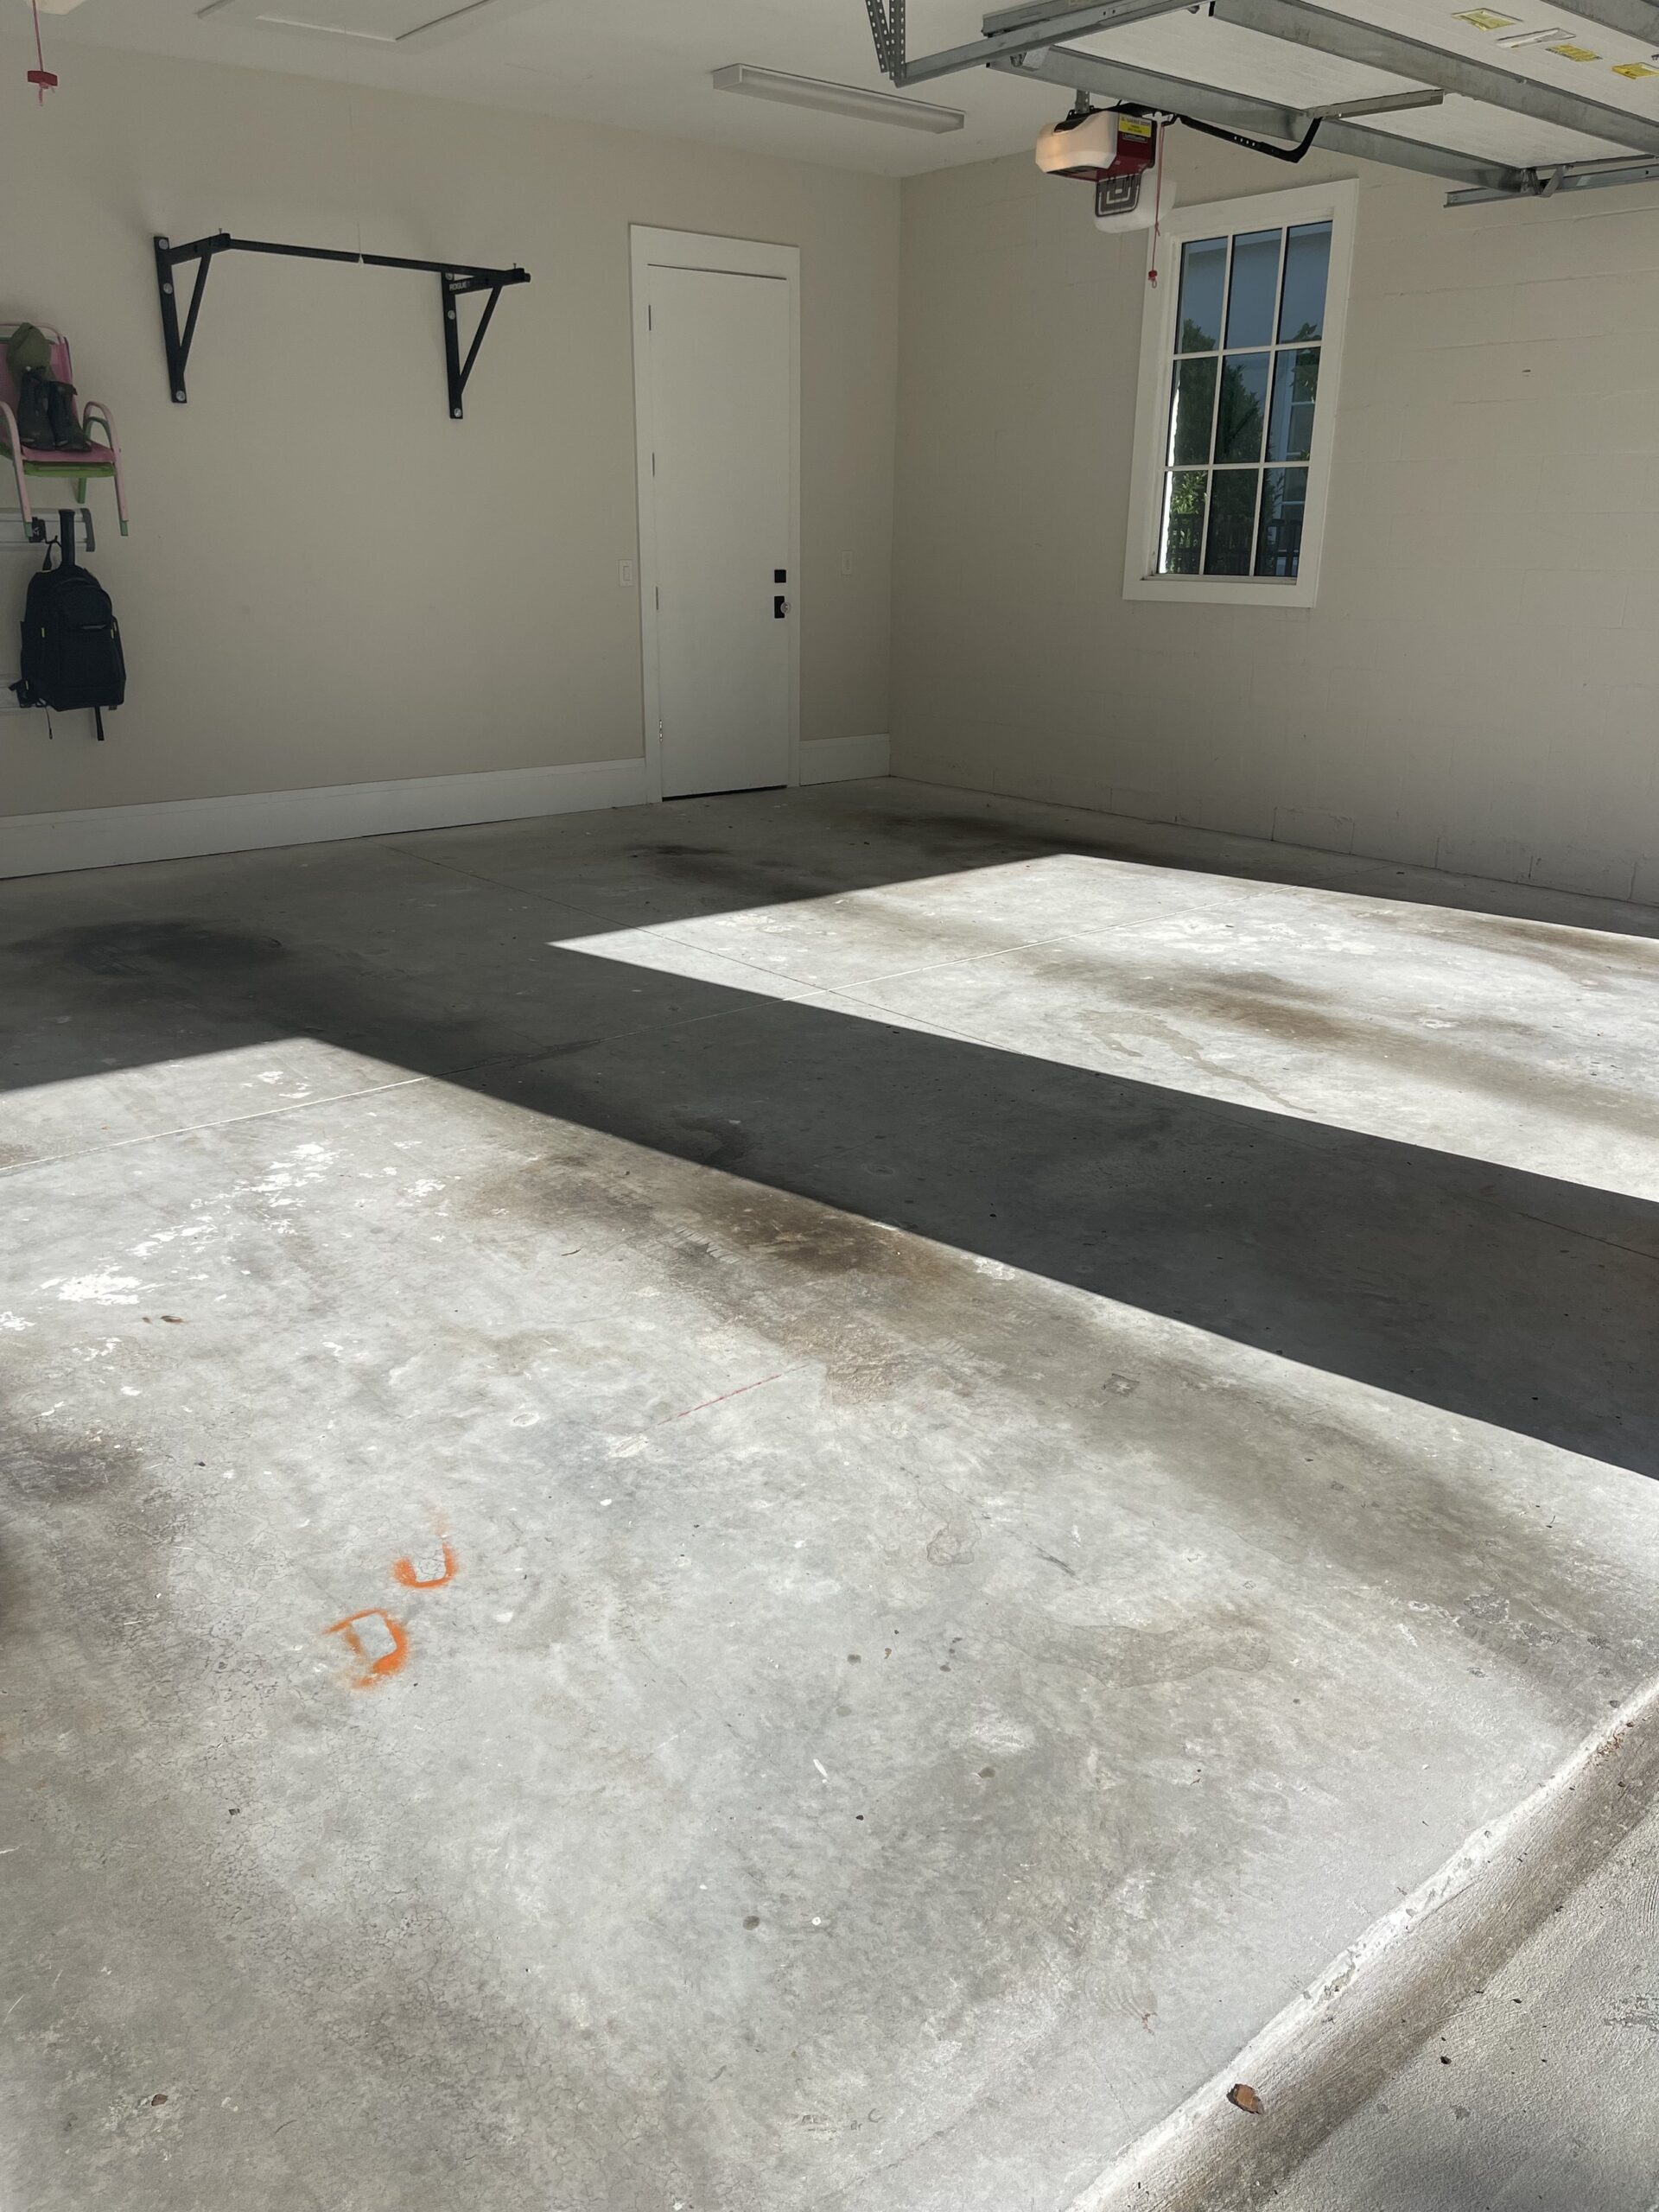 floor situation in a garage before renovation